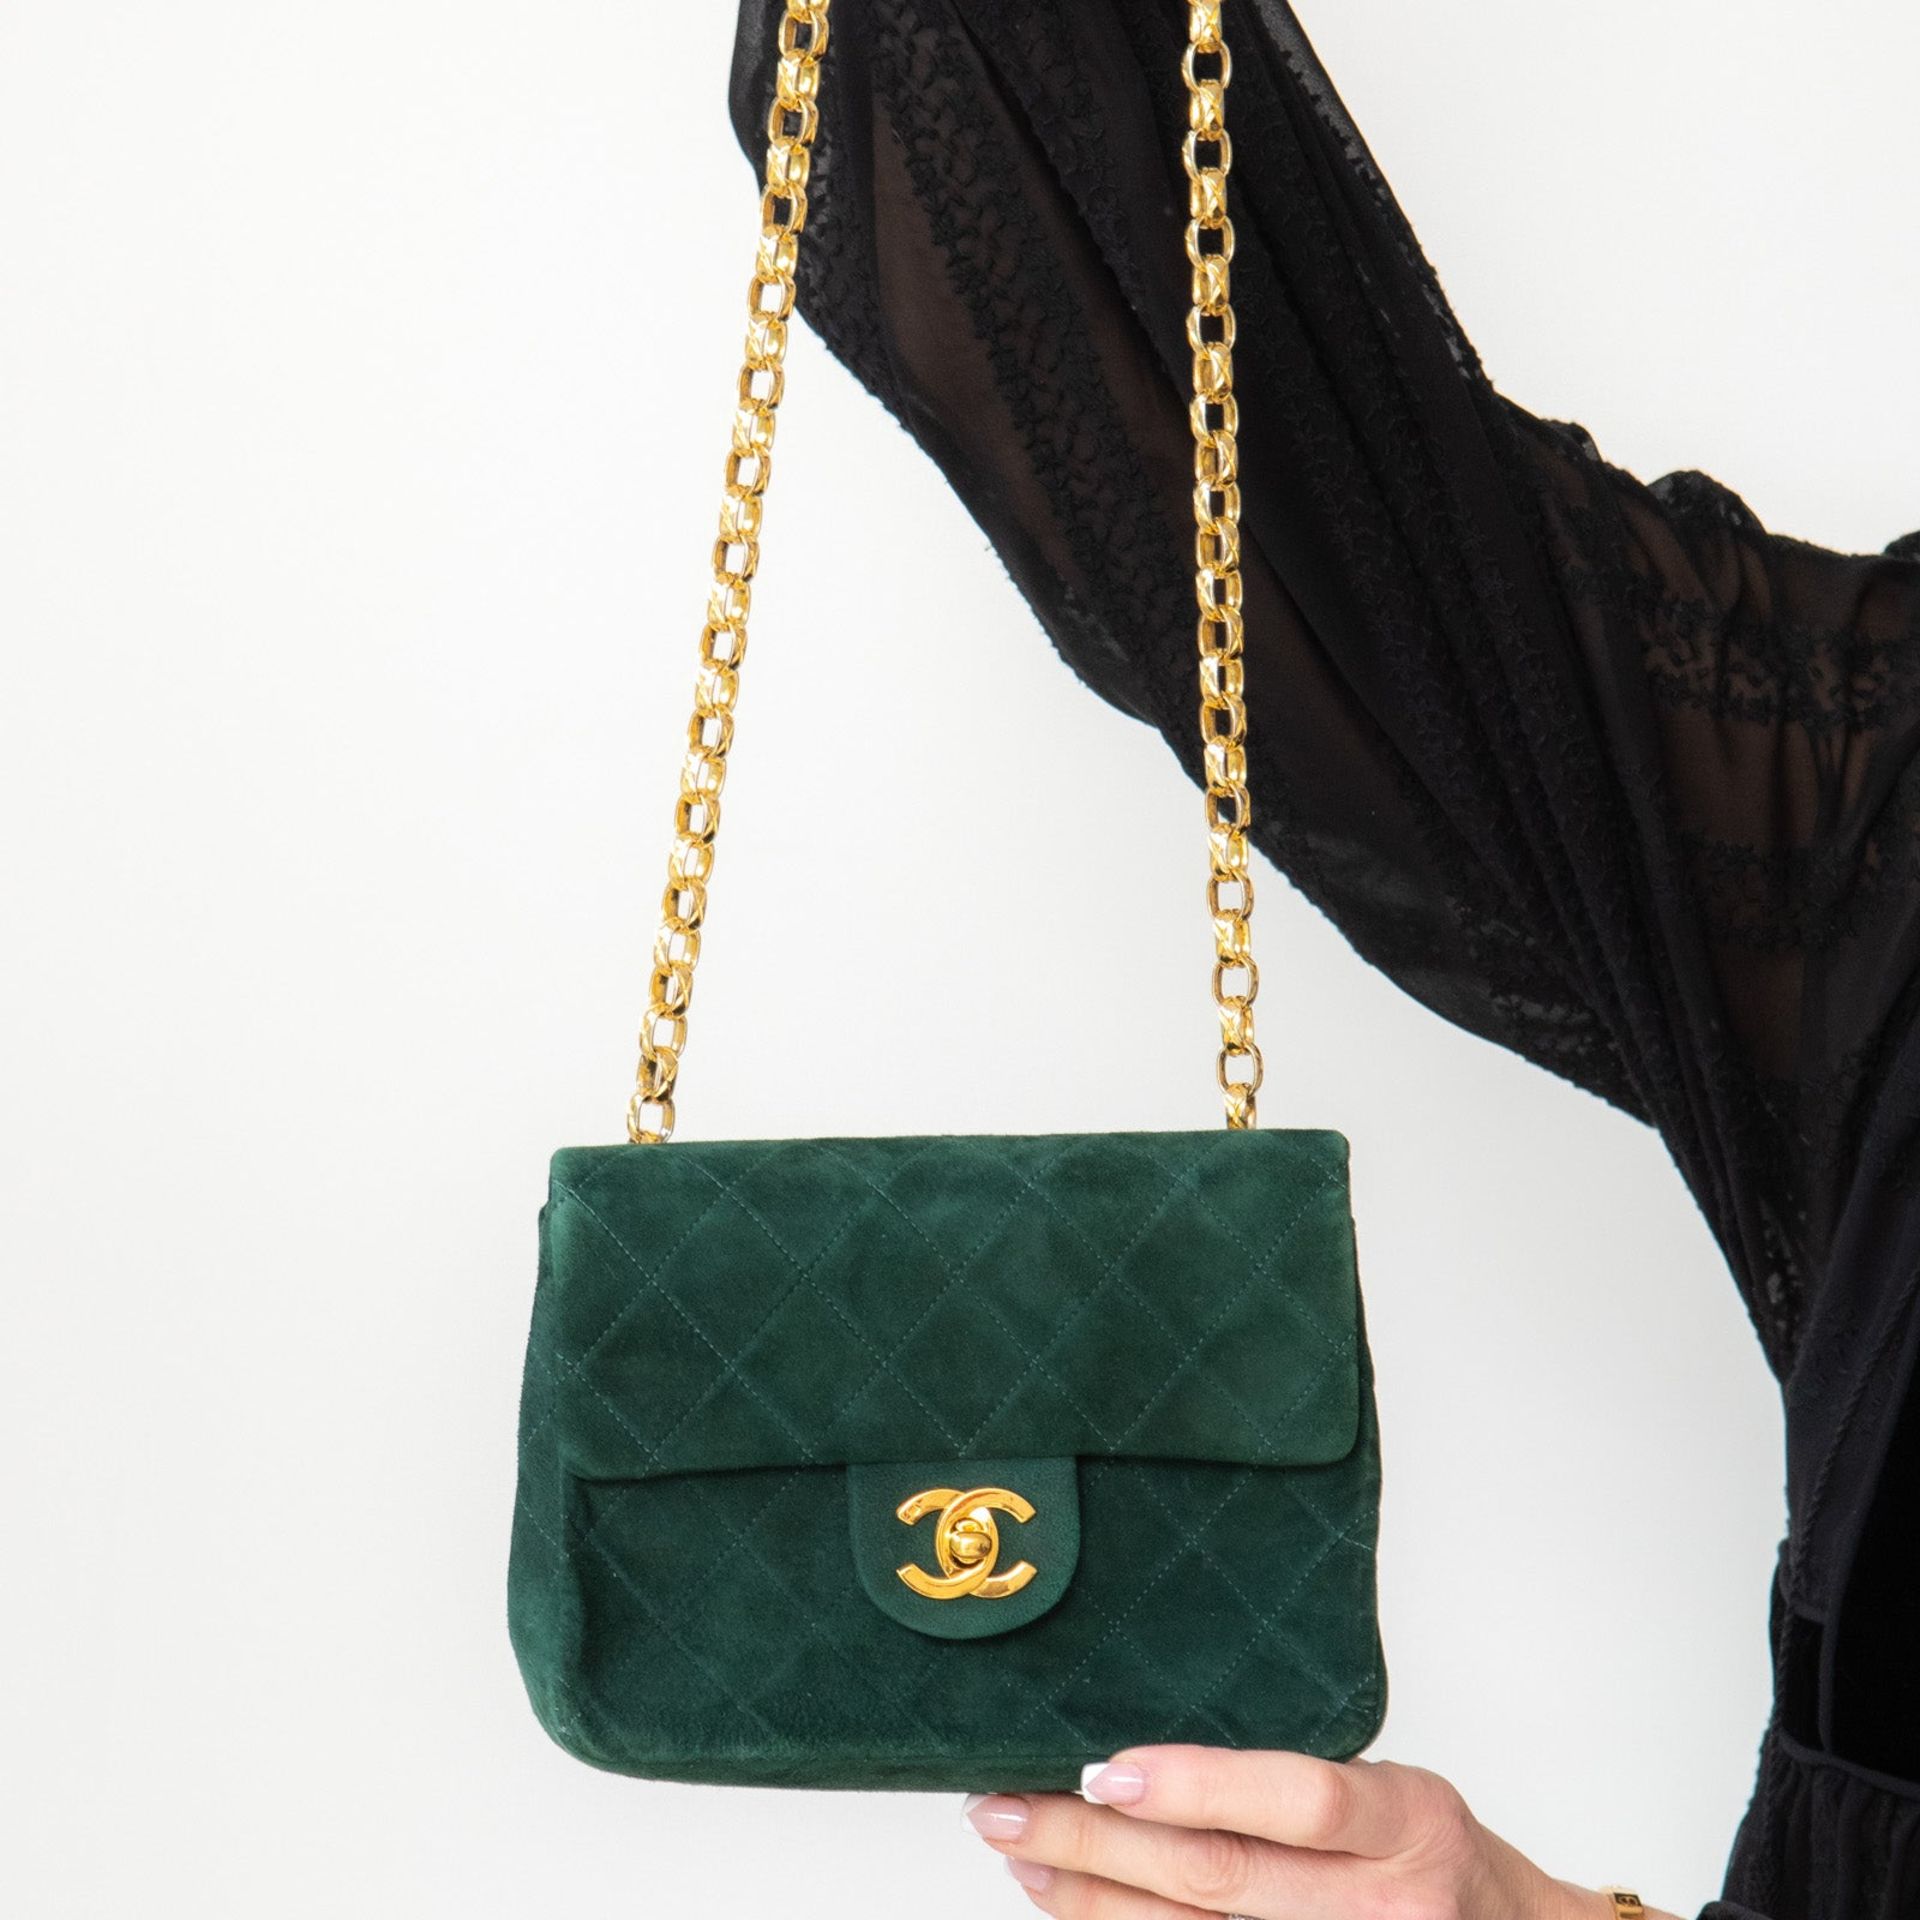 Chanel Vintage Green Mini Square Suede Flap Bag - Image 4 of 16